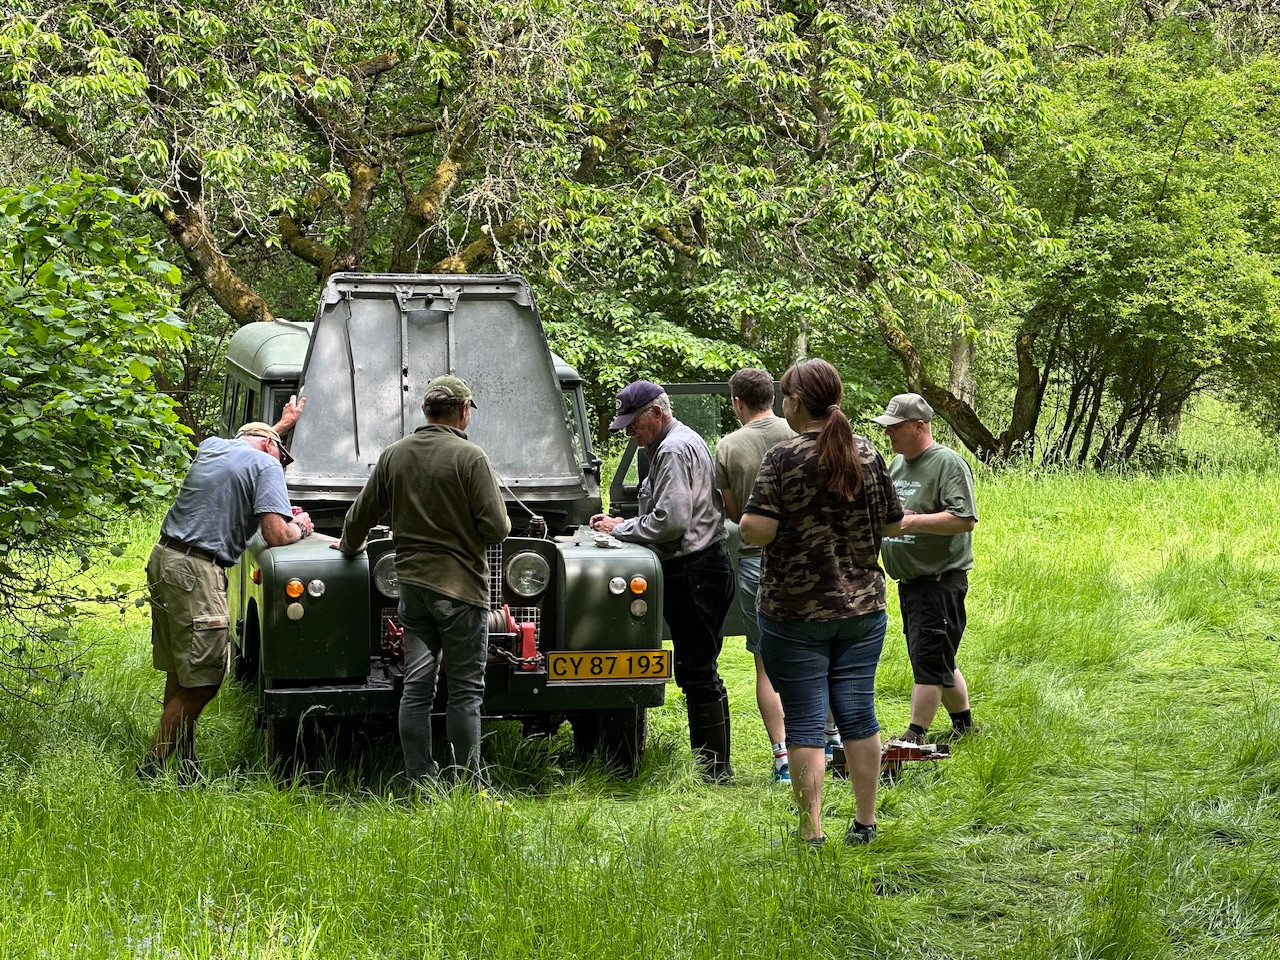 A 1962 Series IIa Land Rover made a few hickups on the offroad course, and immediately members came over with, tools, parts and knowhow. After some tyre kicking, and some tinkering under the hood, it purred like a kitten once more.